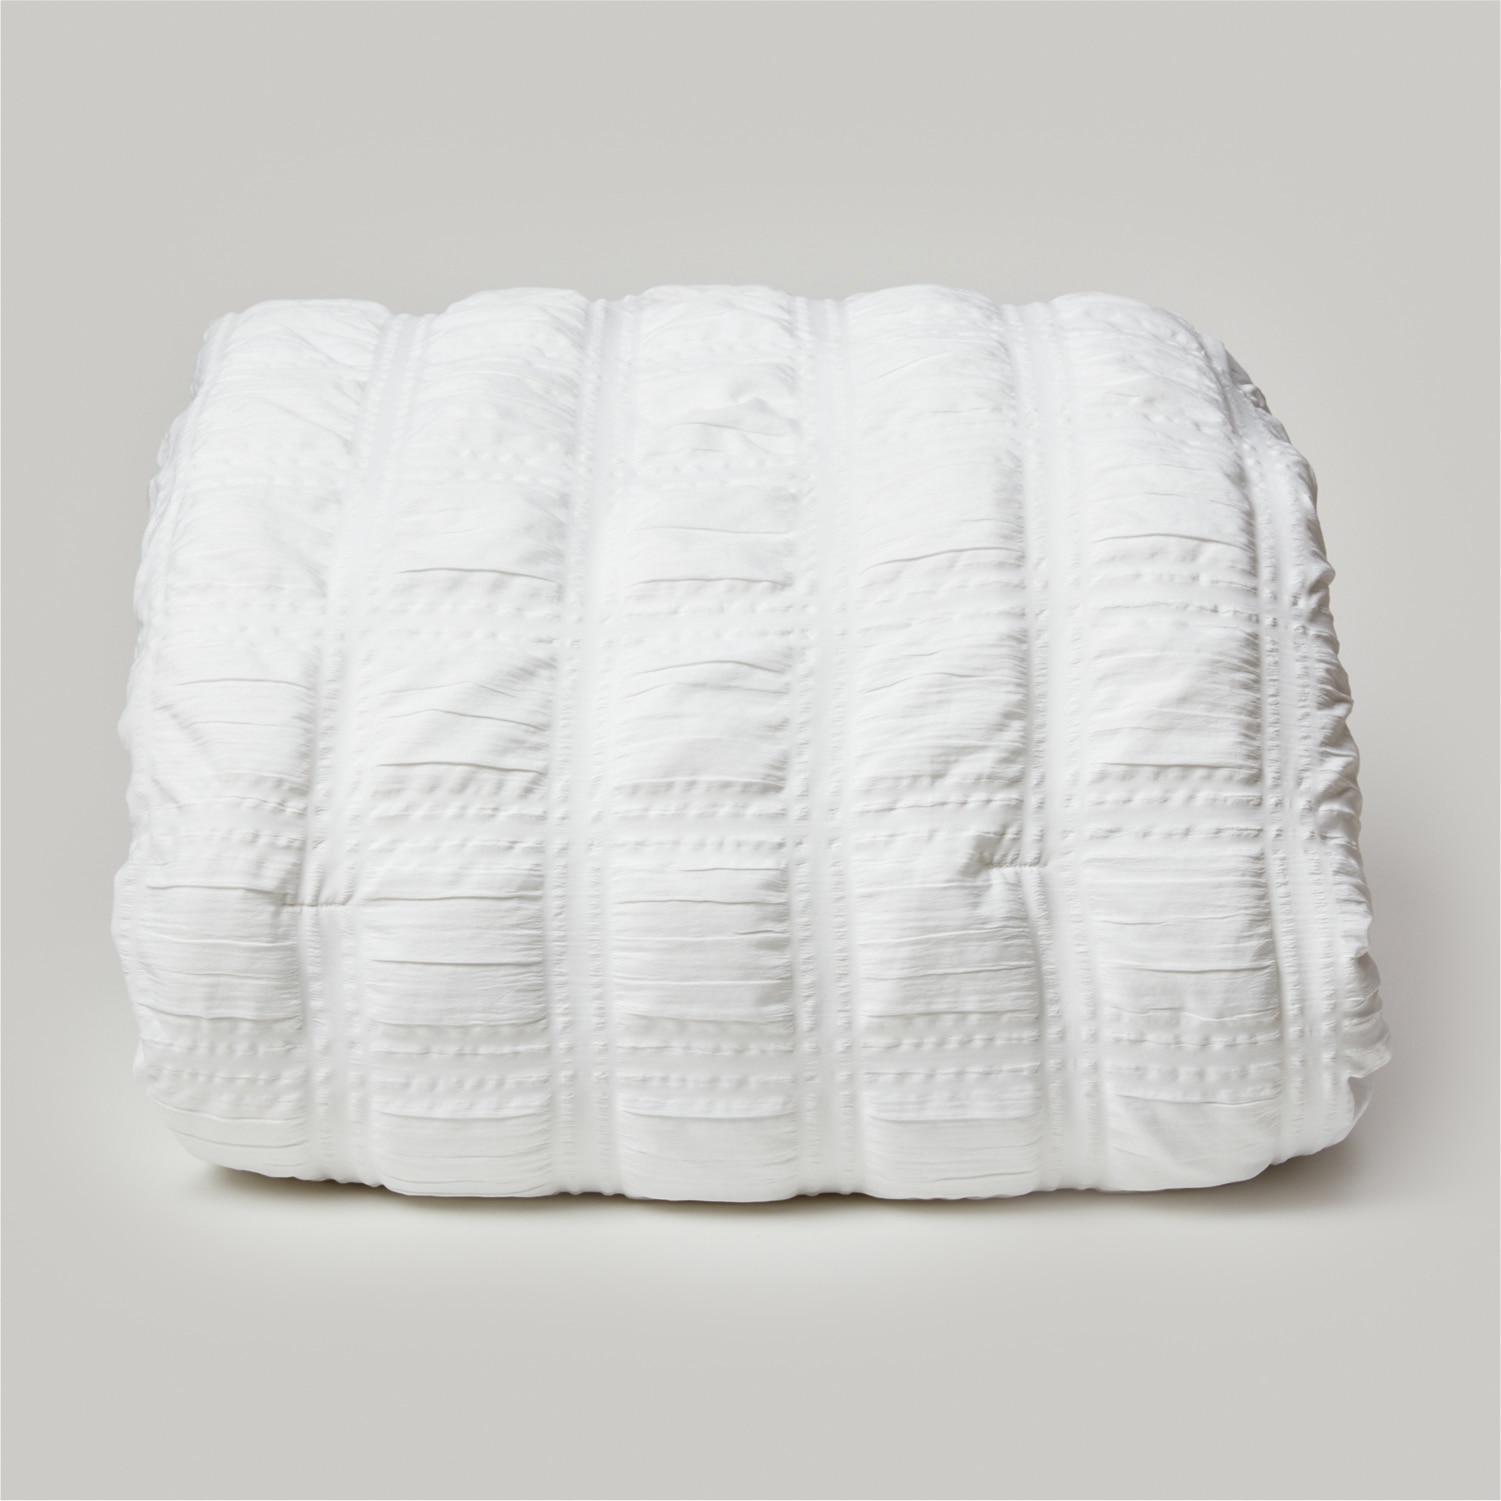 Dormify Caia Cloud Comforter and Sham Set - Twin/Twin XL